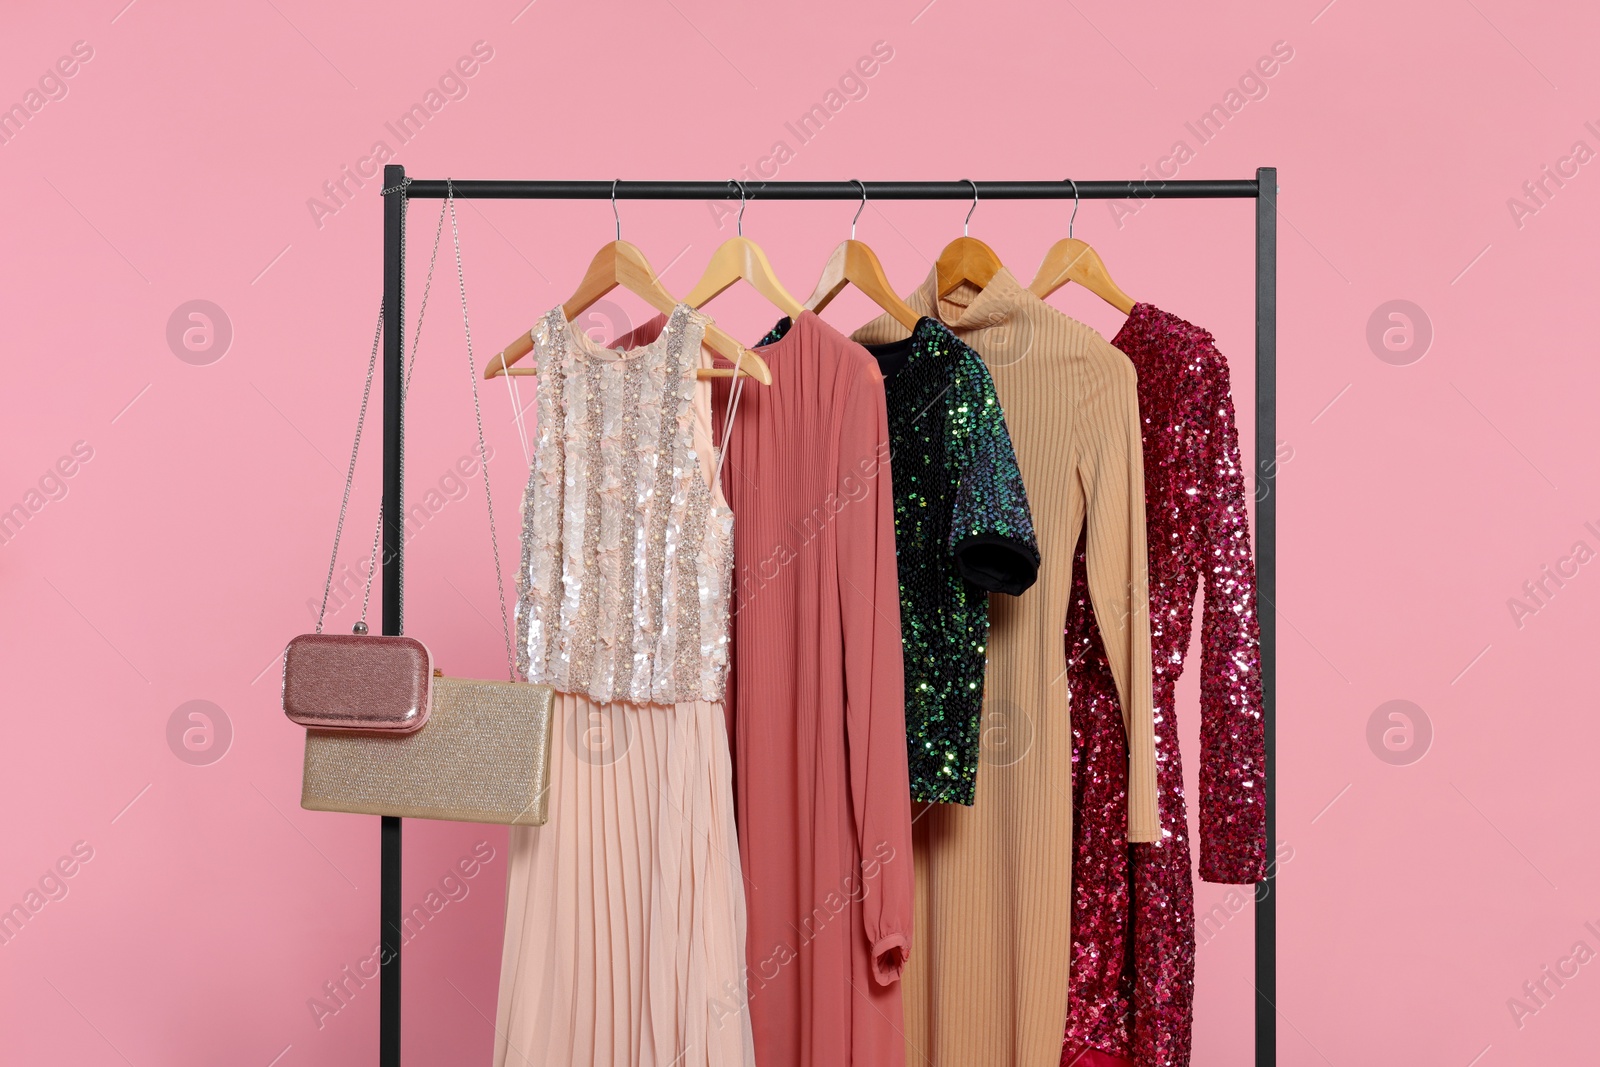 Photo of Rack with stylish women's clothes on wooden hangers and accessories against pink background